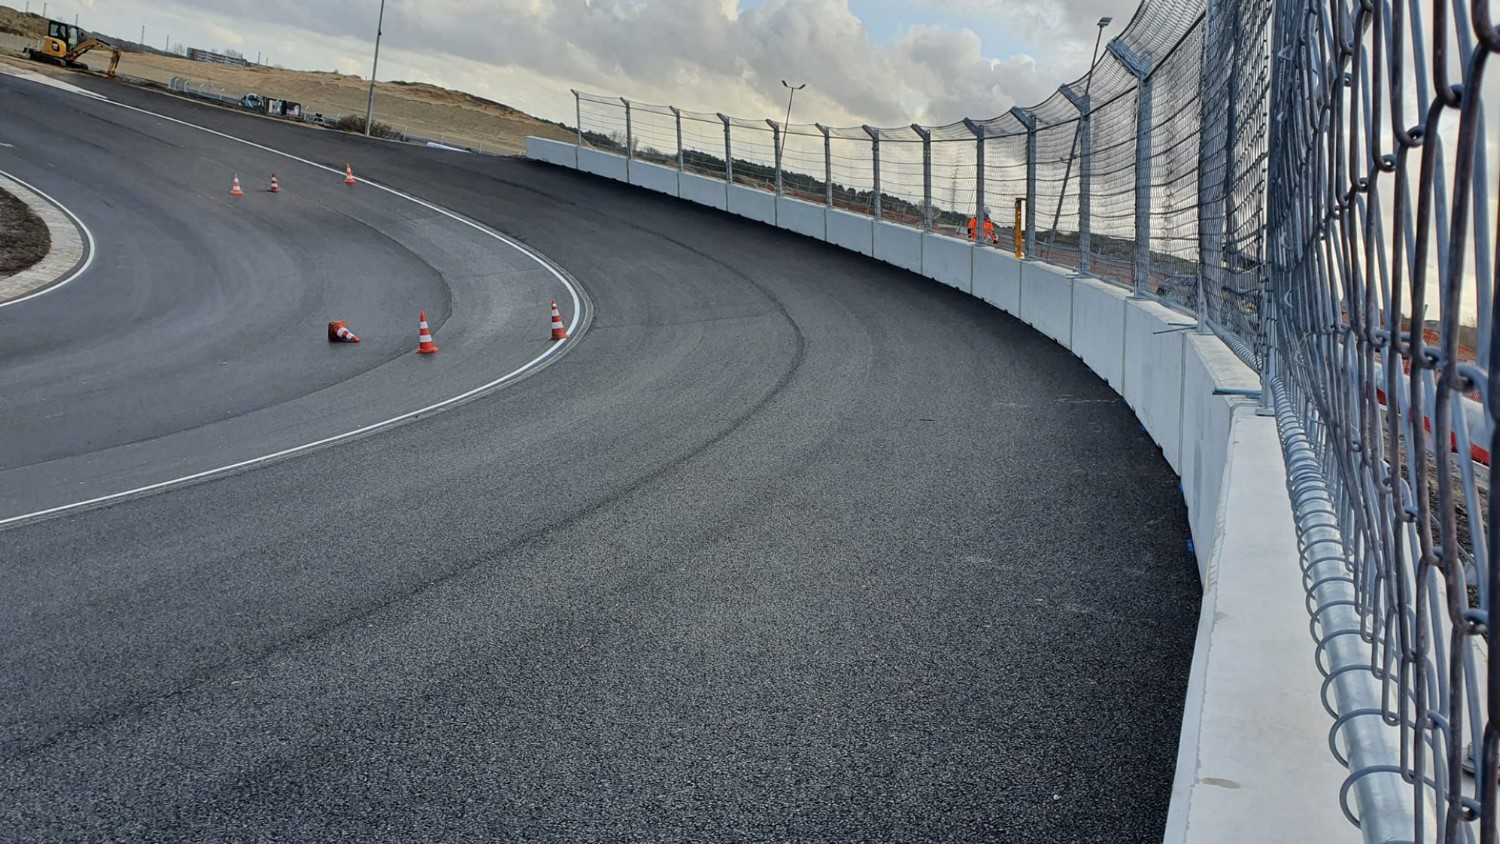 Zandvoort banking is 18% but that appears to be the upper half that the cars won't use - that is runoff. The portion the cars will race on appears to be similar to Indy